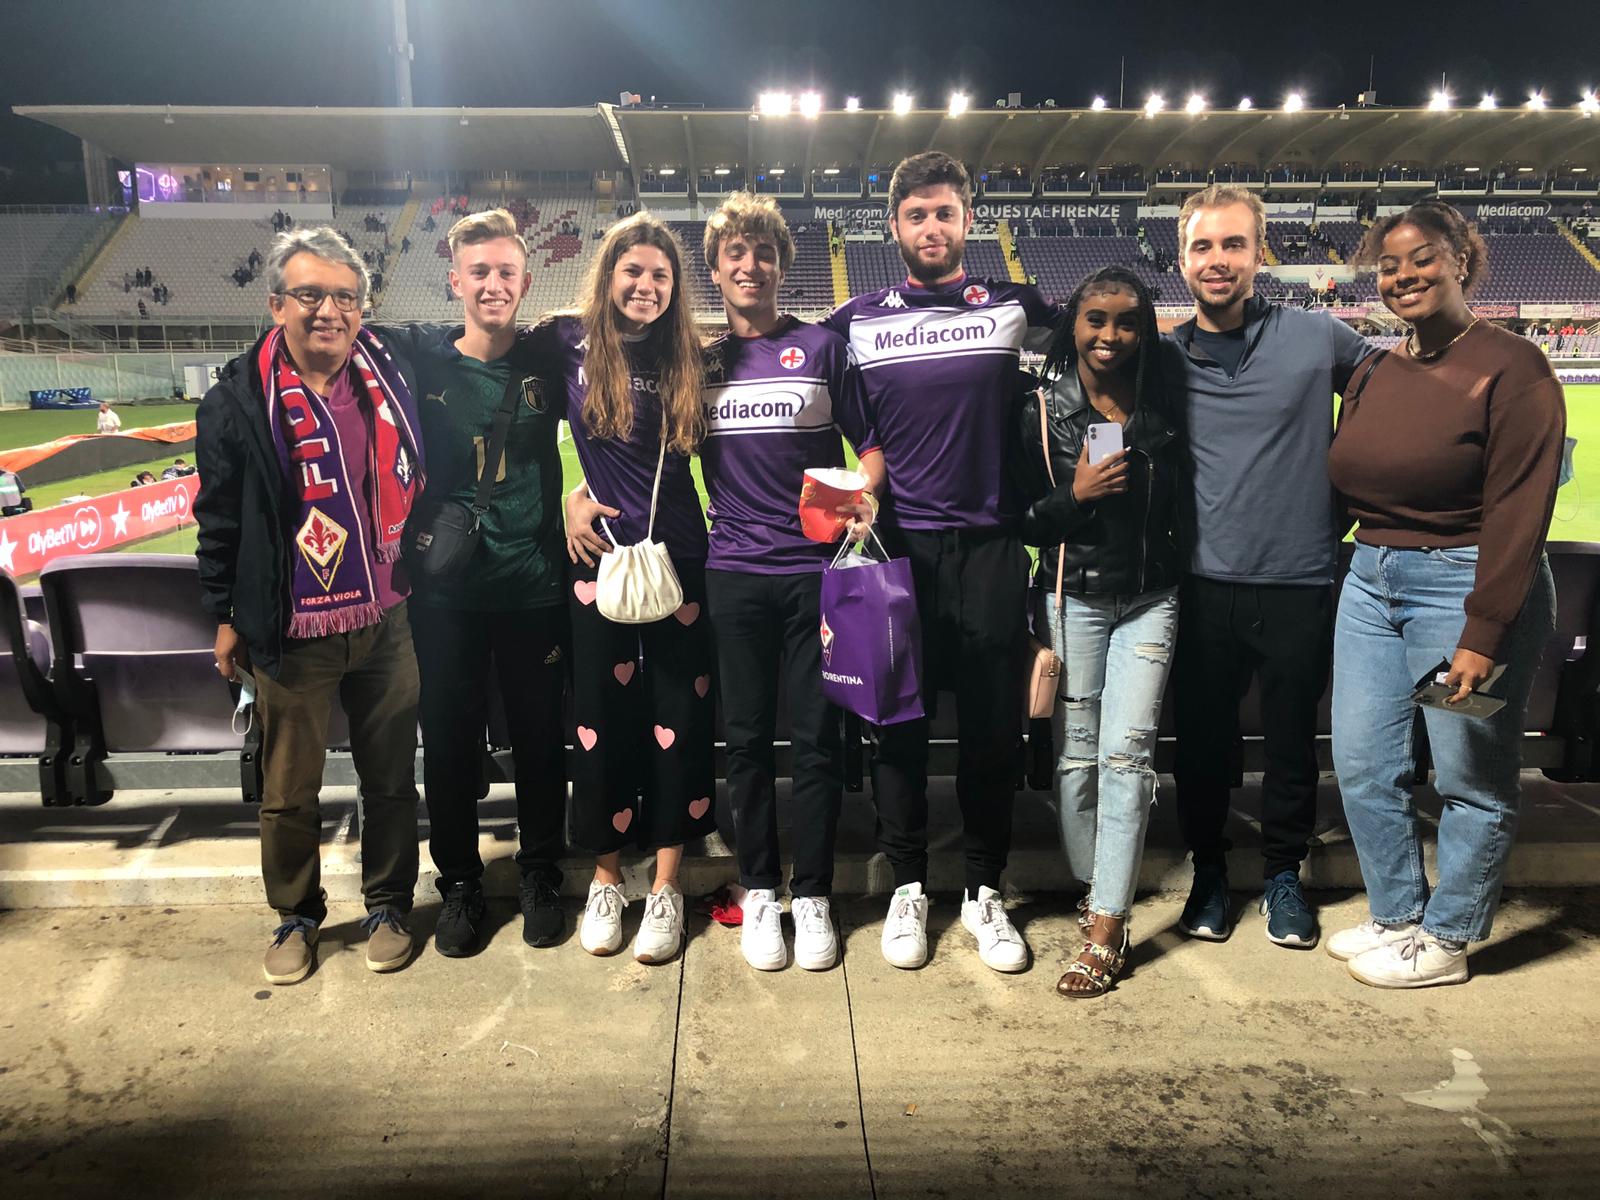 Seven students and the Resident Assistant standing in Florence's soccer stadium.